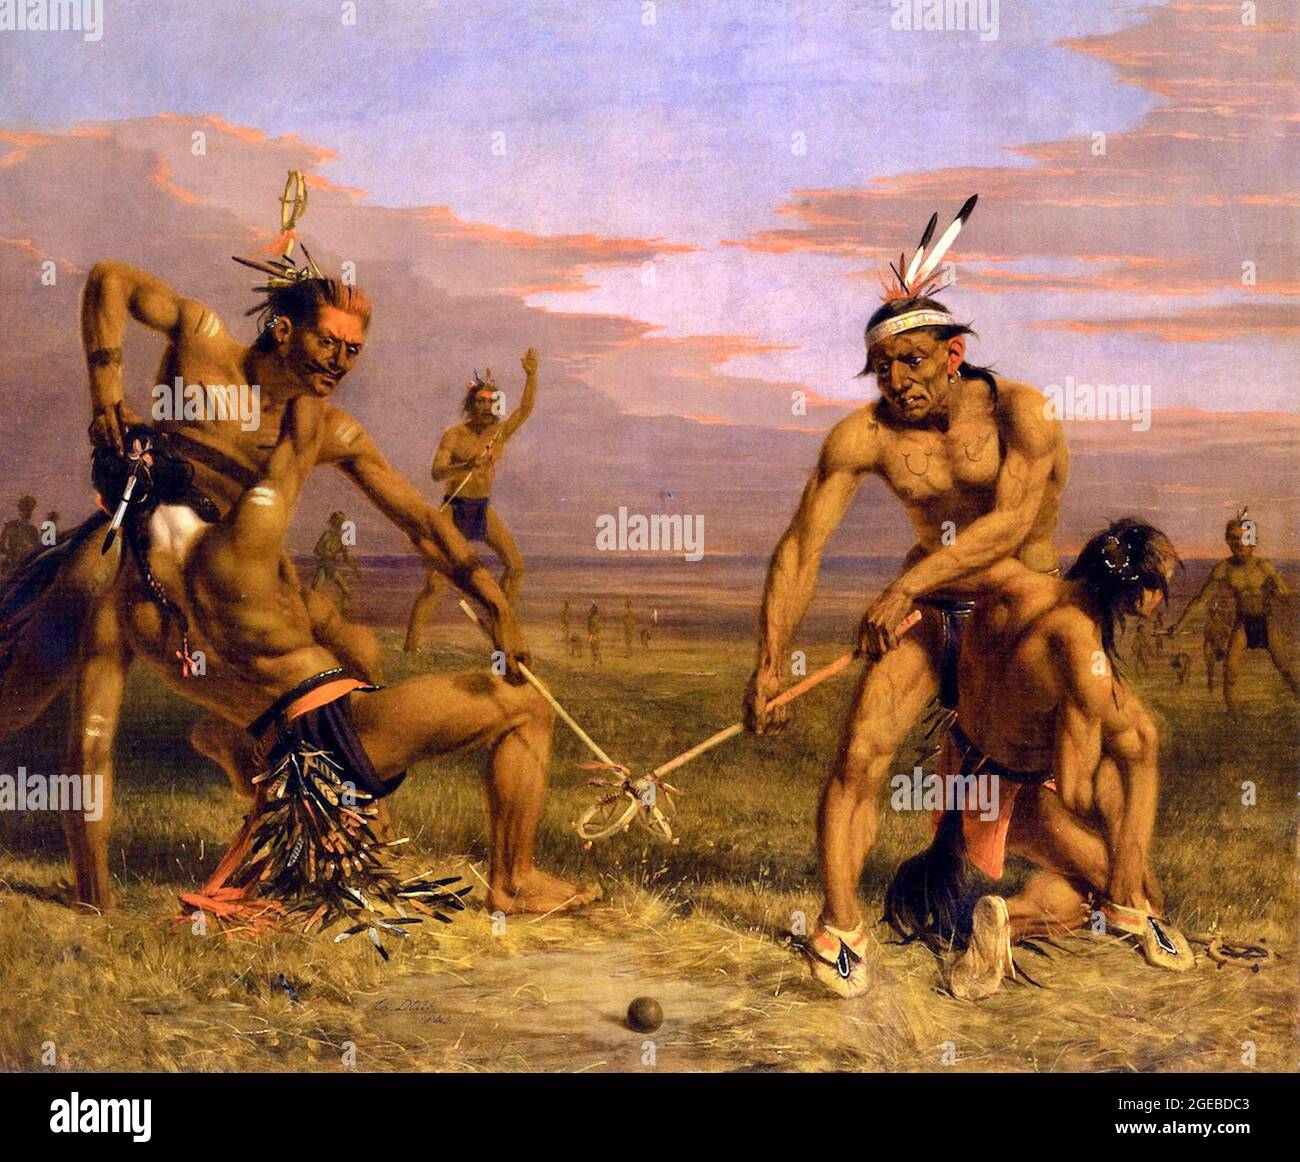 Charles Deas artwork - Sioux playing Ball - 1843 Stock Photo